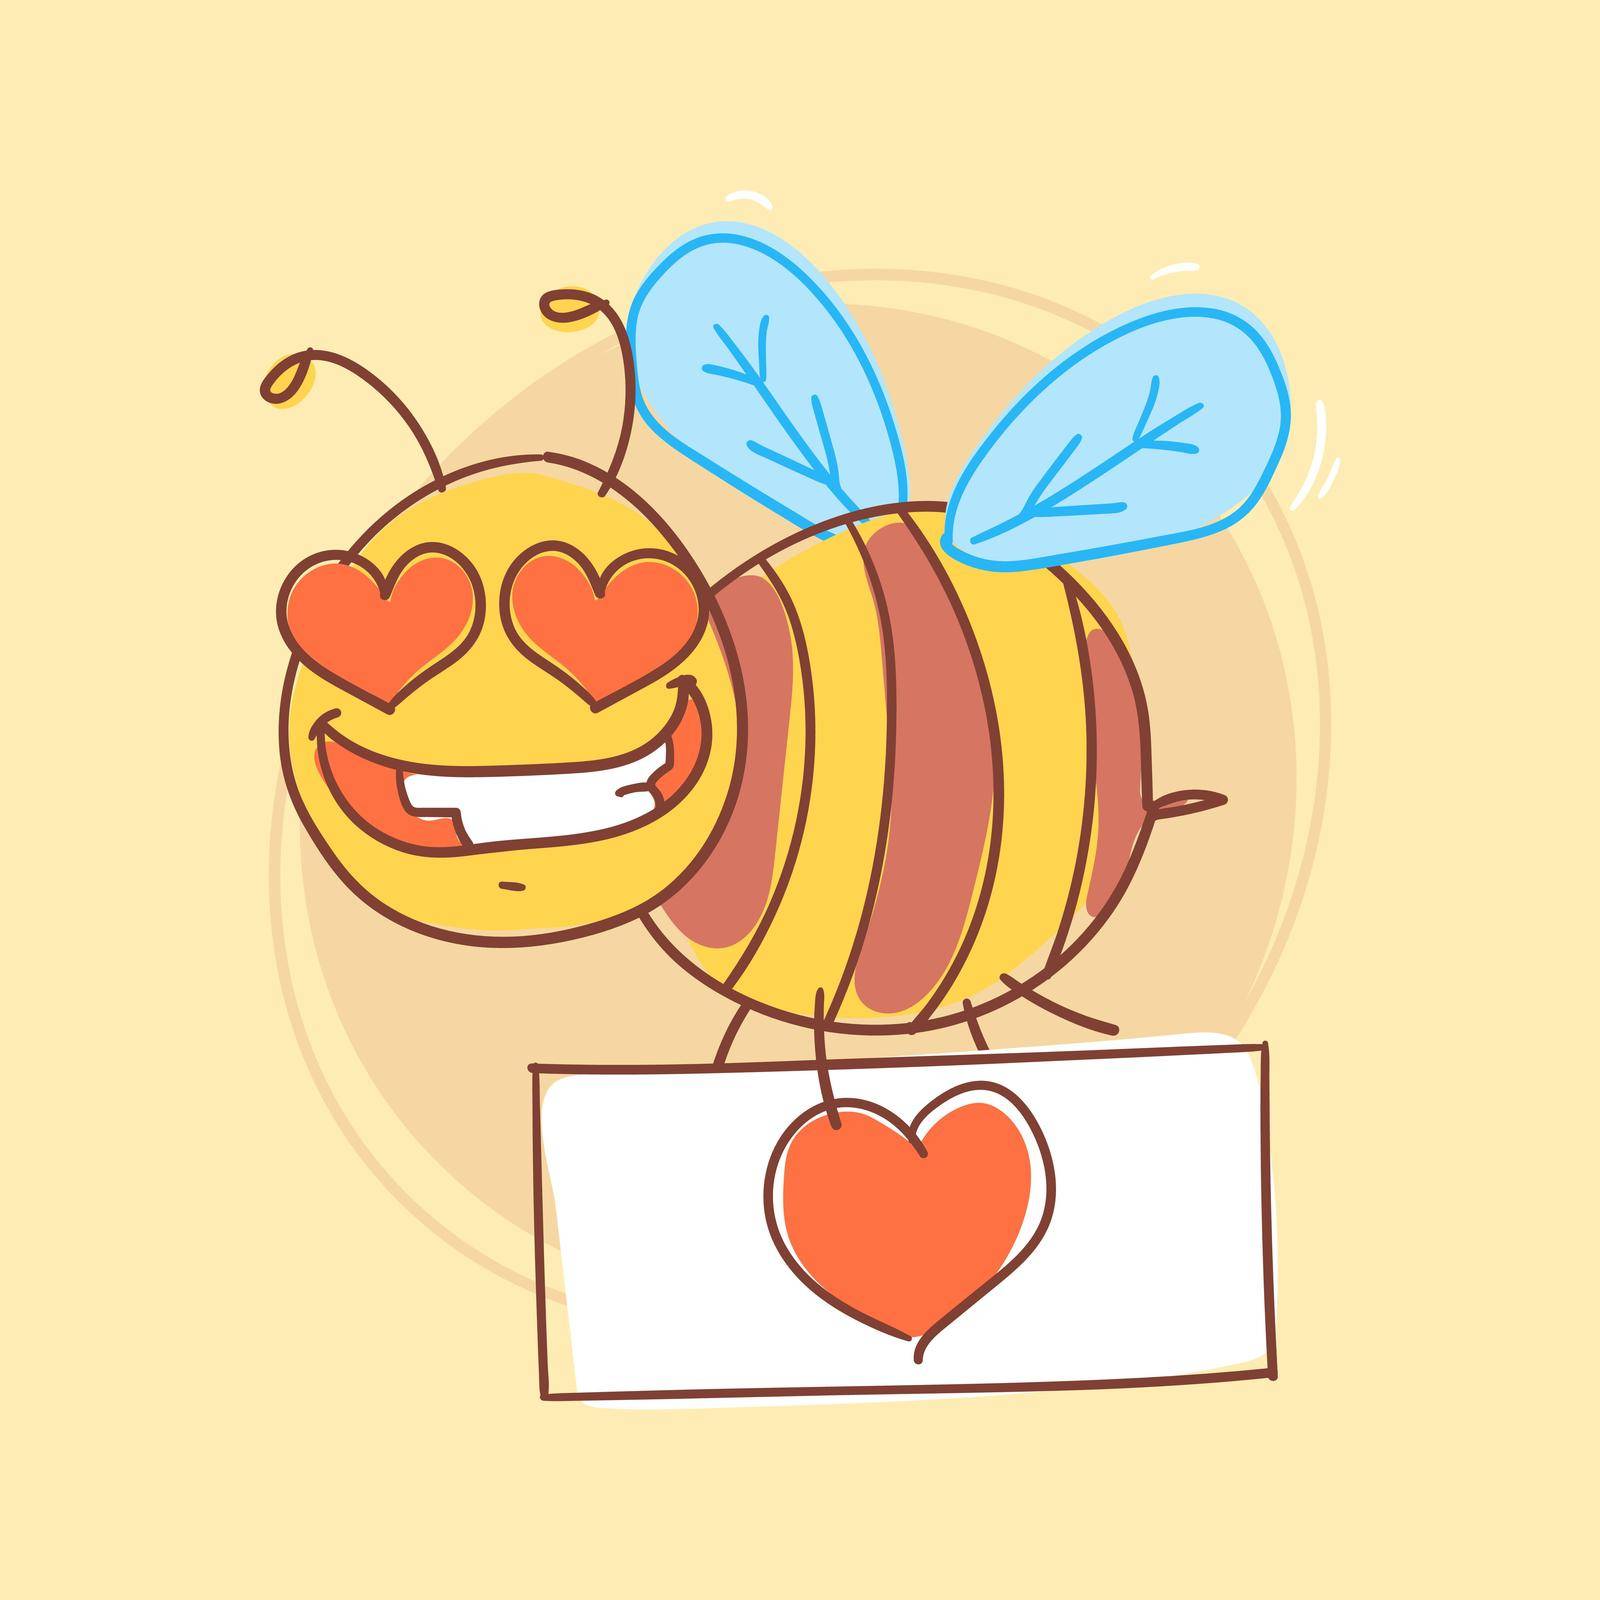 Bee holding sign with heart and smiling. Funny character by yuriytsirkunov